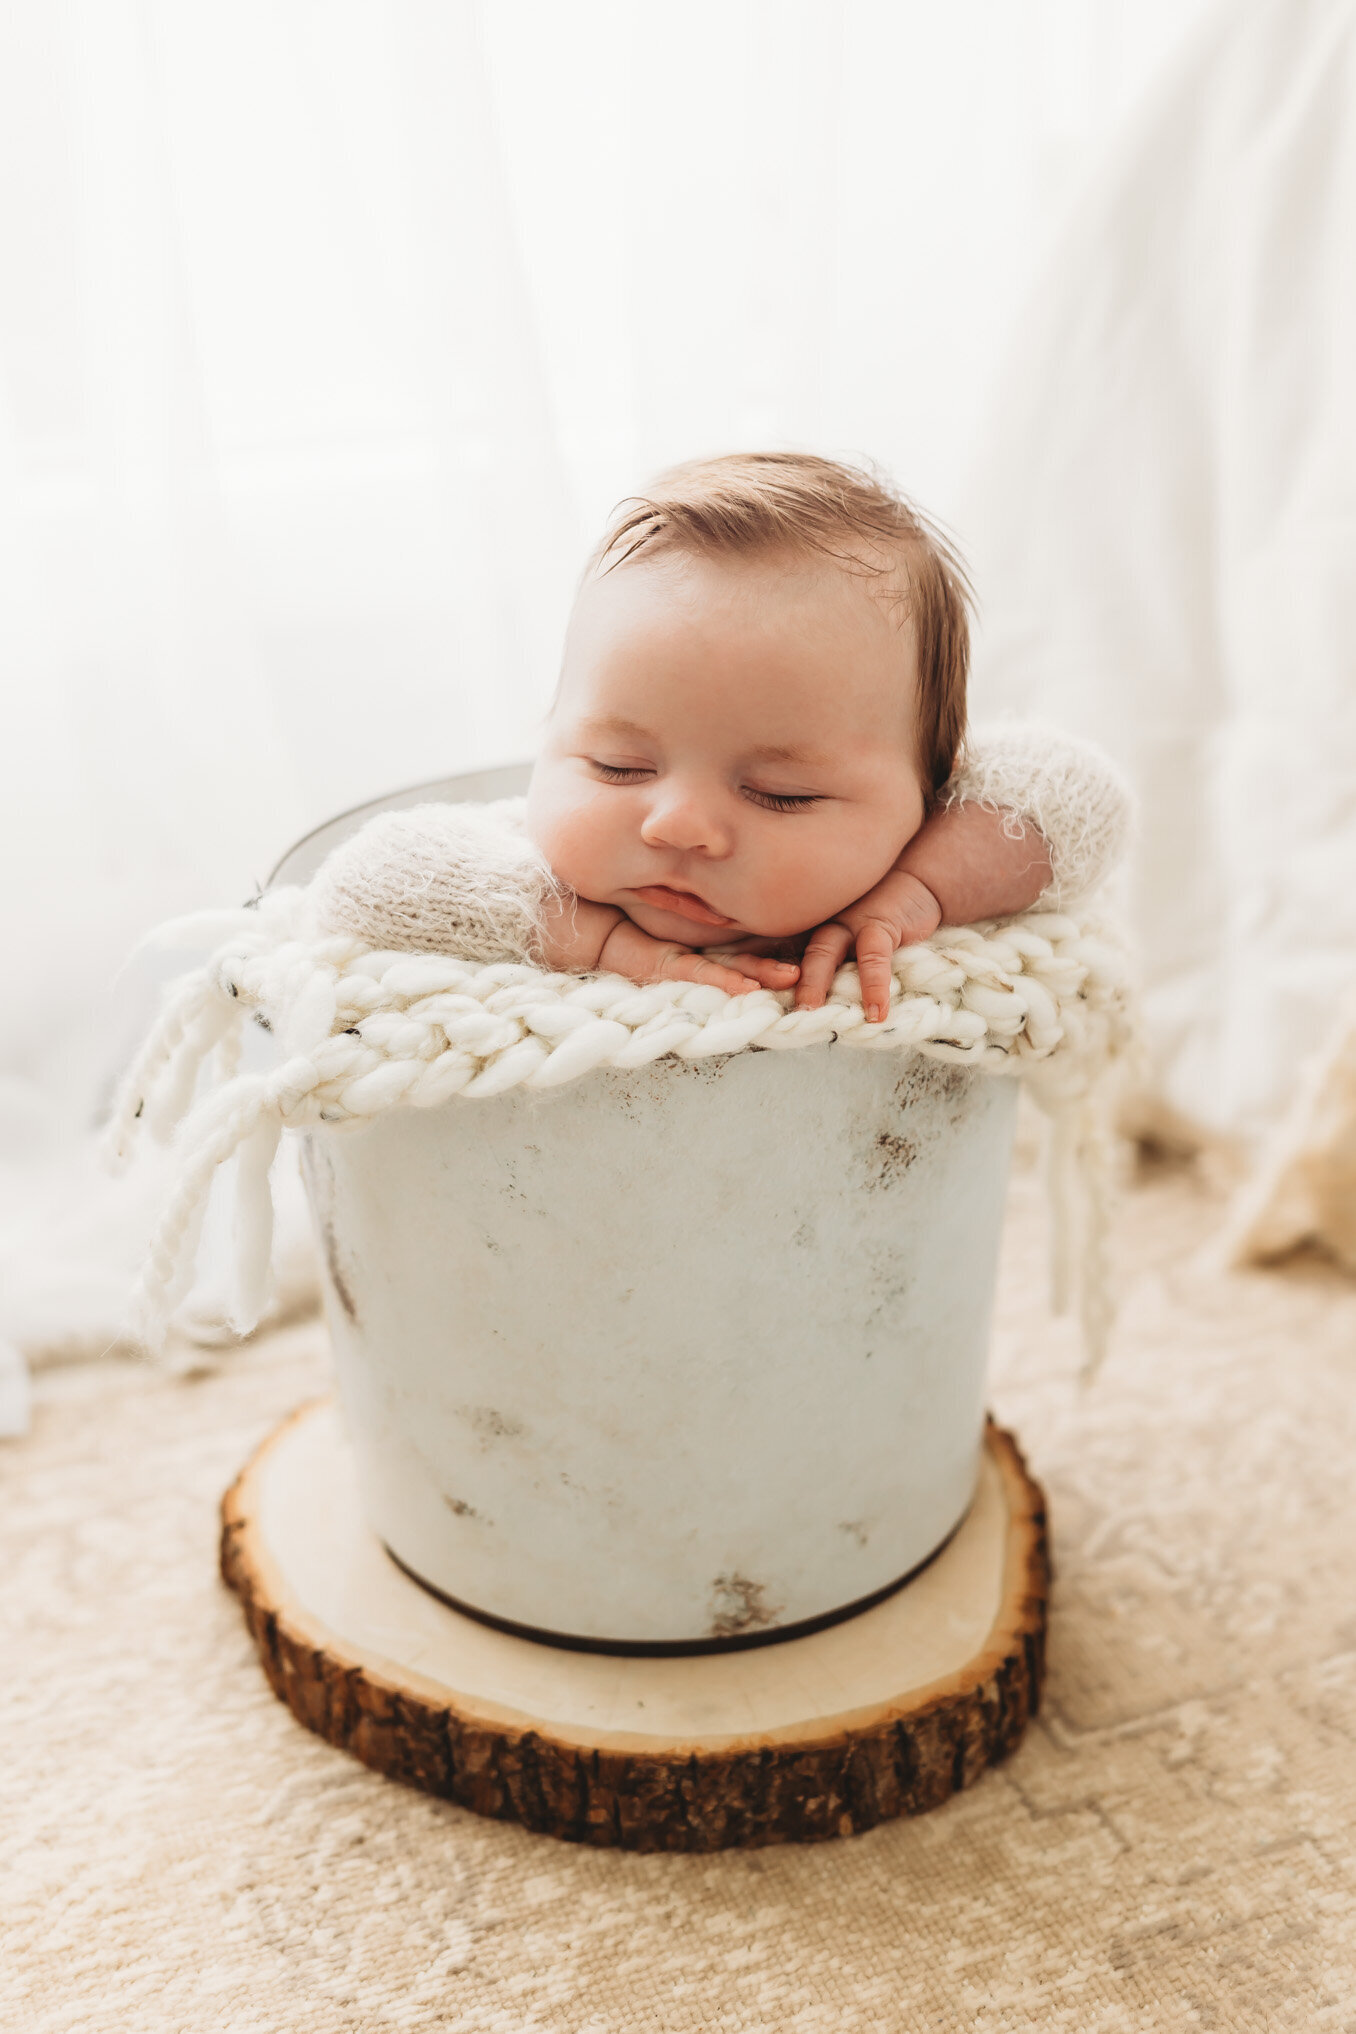 Newborn boy with beautiful hair sleeping with his head on his hands in a white bucket